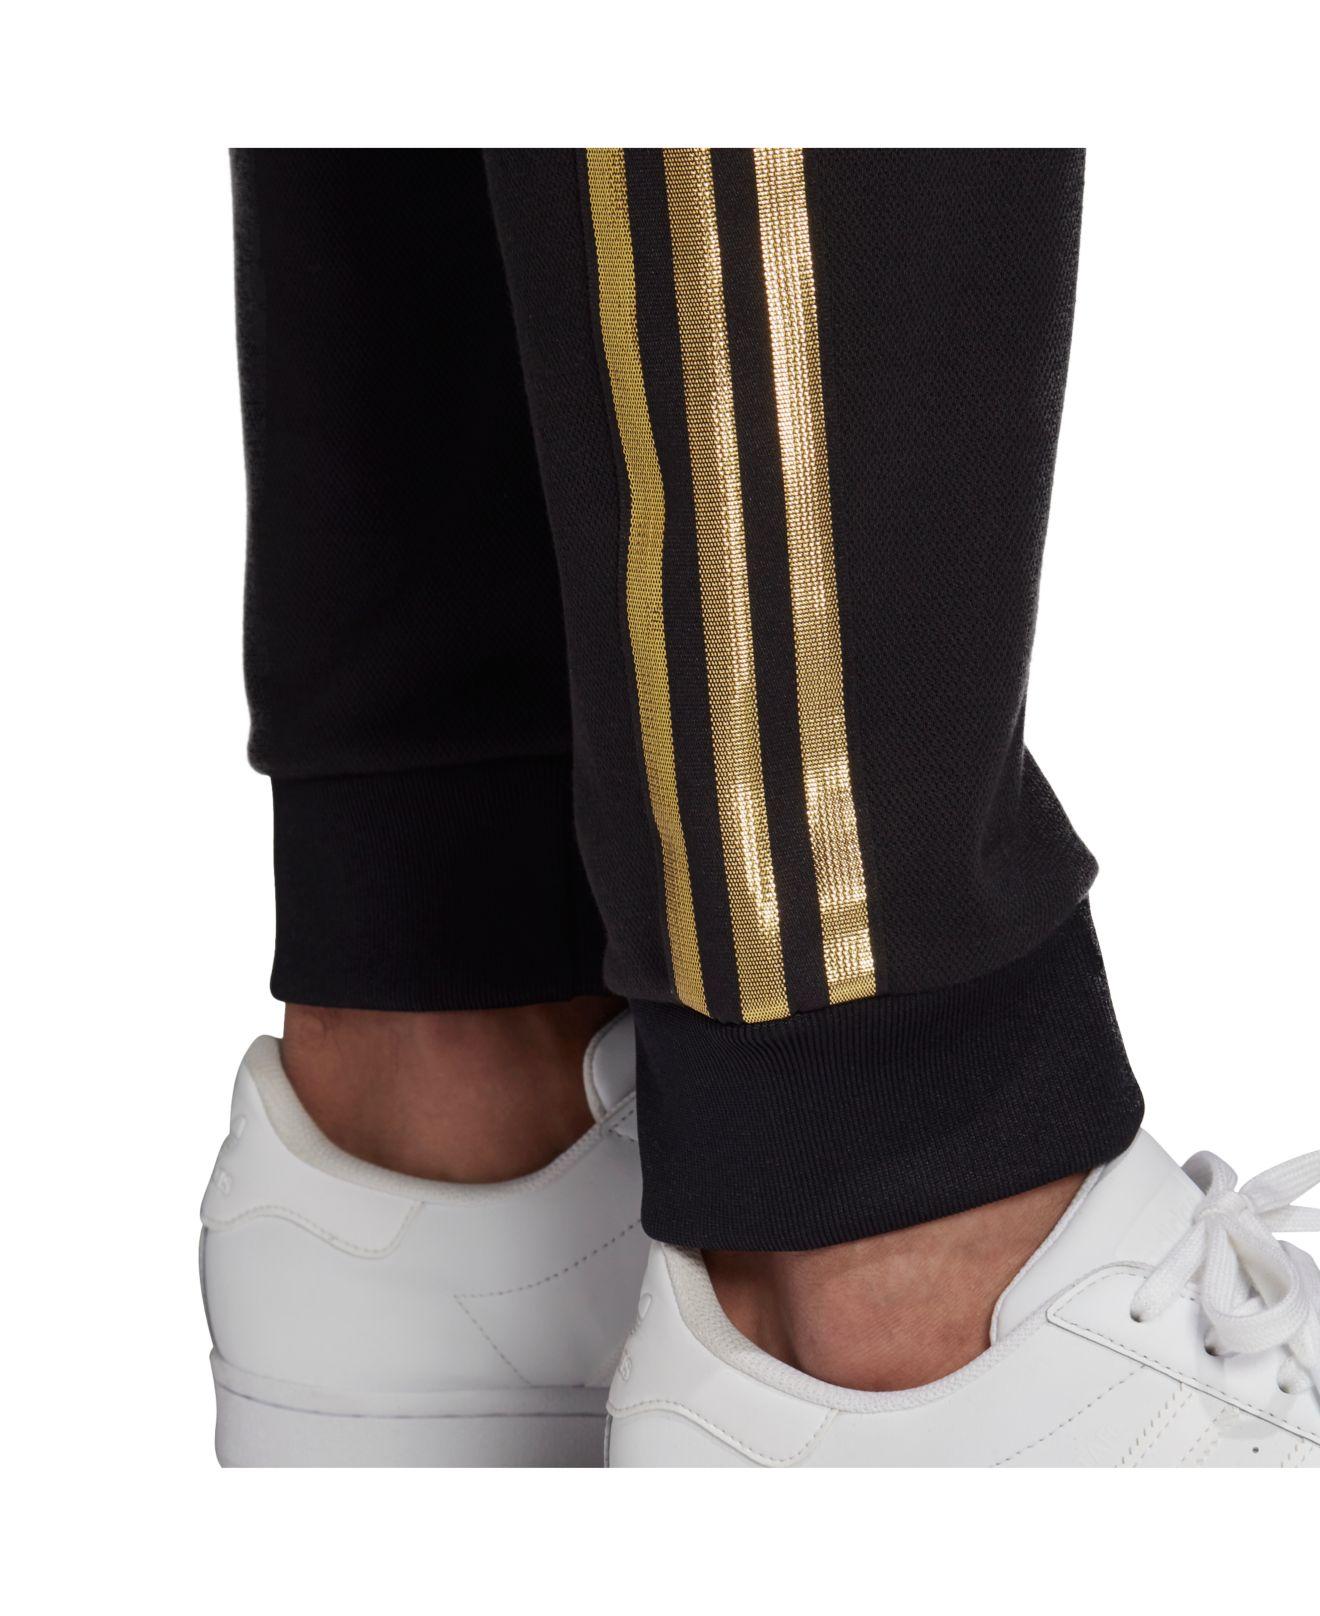 adidas Synthetic Sst 24k Track Pants in Black/Gold (Black) for Men | Lyst